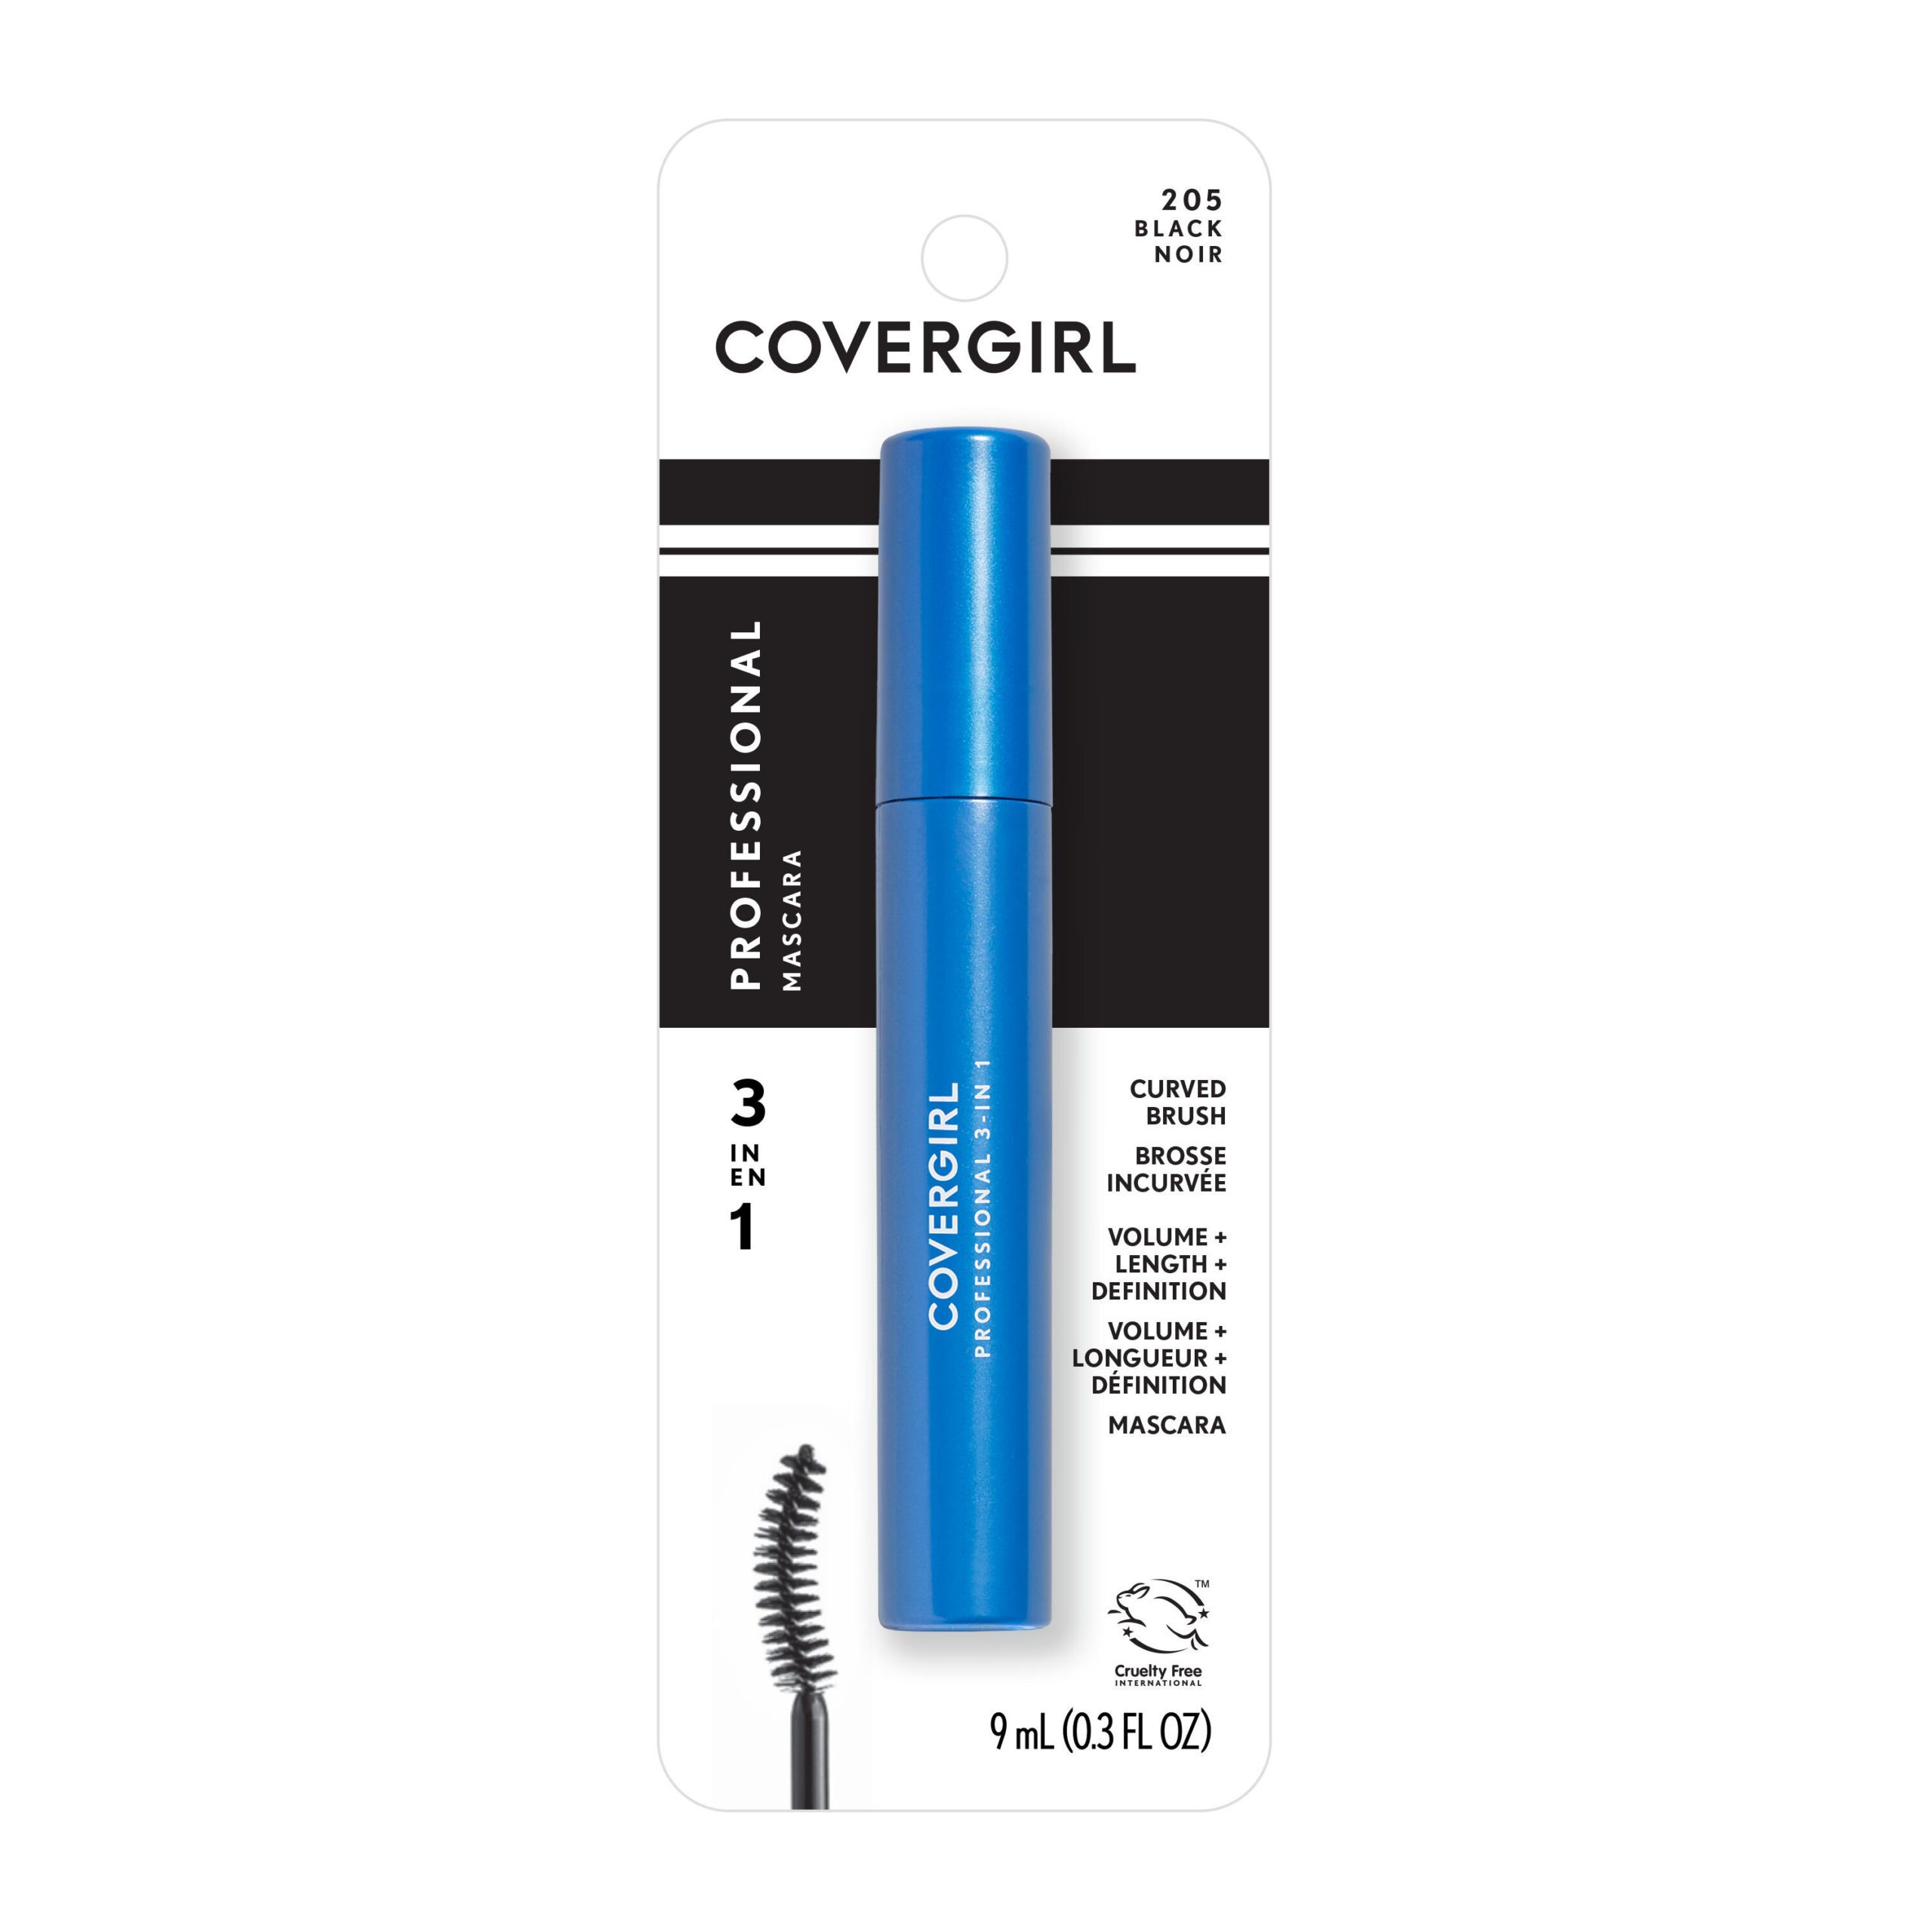 Photos - Mascara CoverGirl Professional All-In-One Curved Brush  - Black 